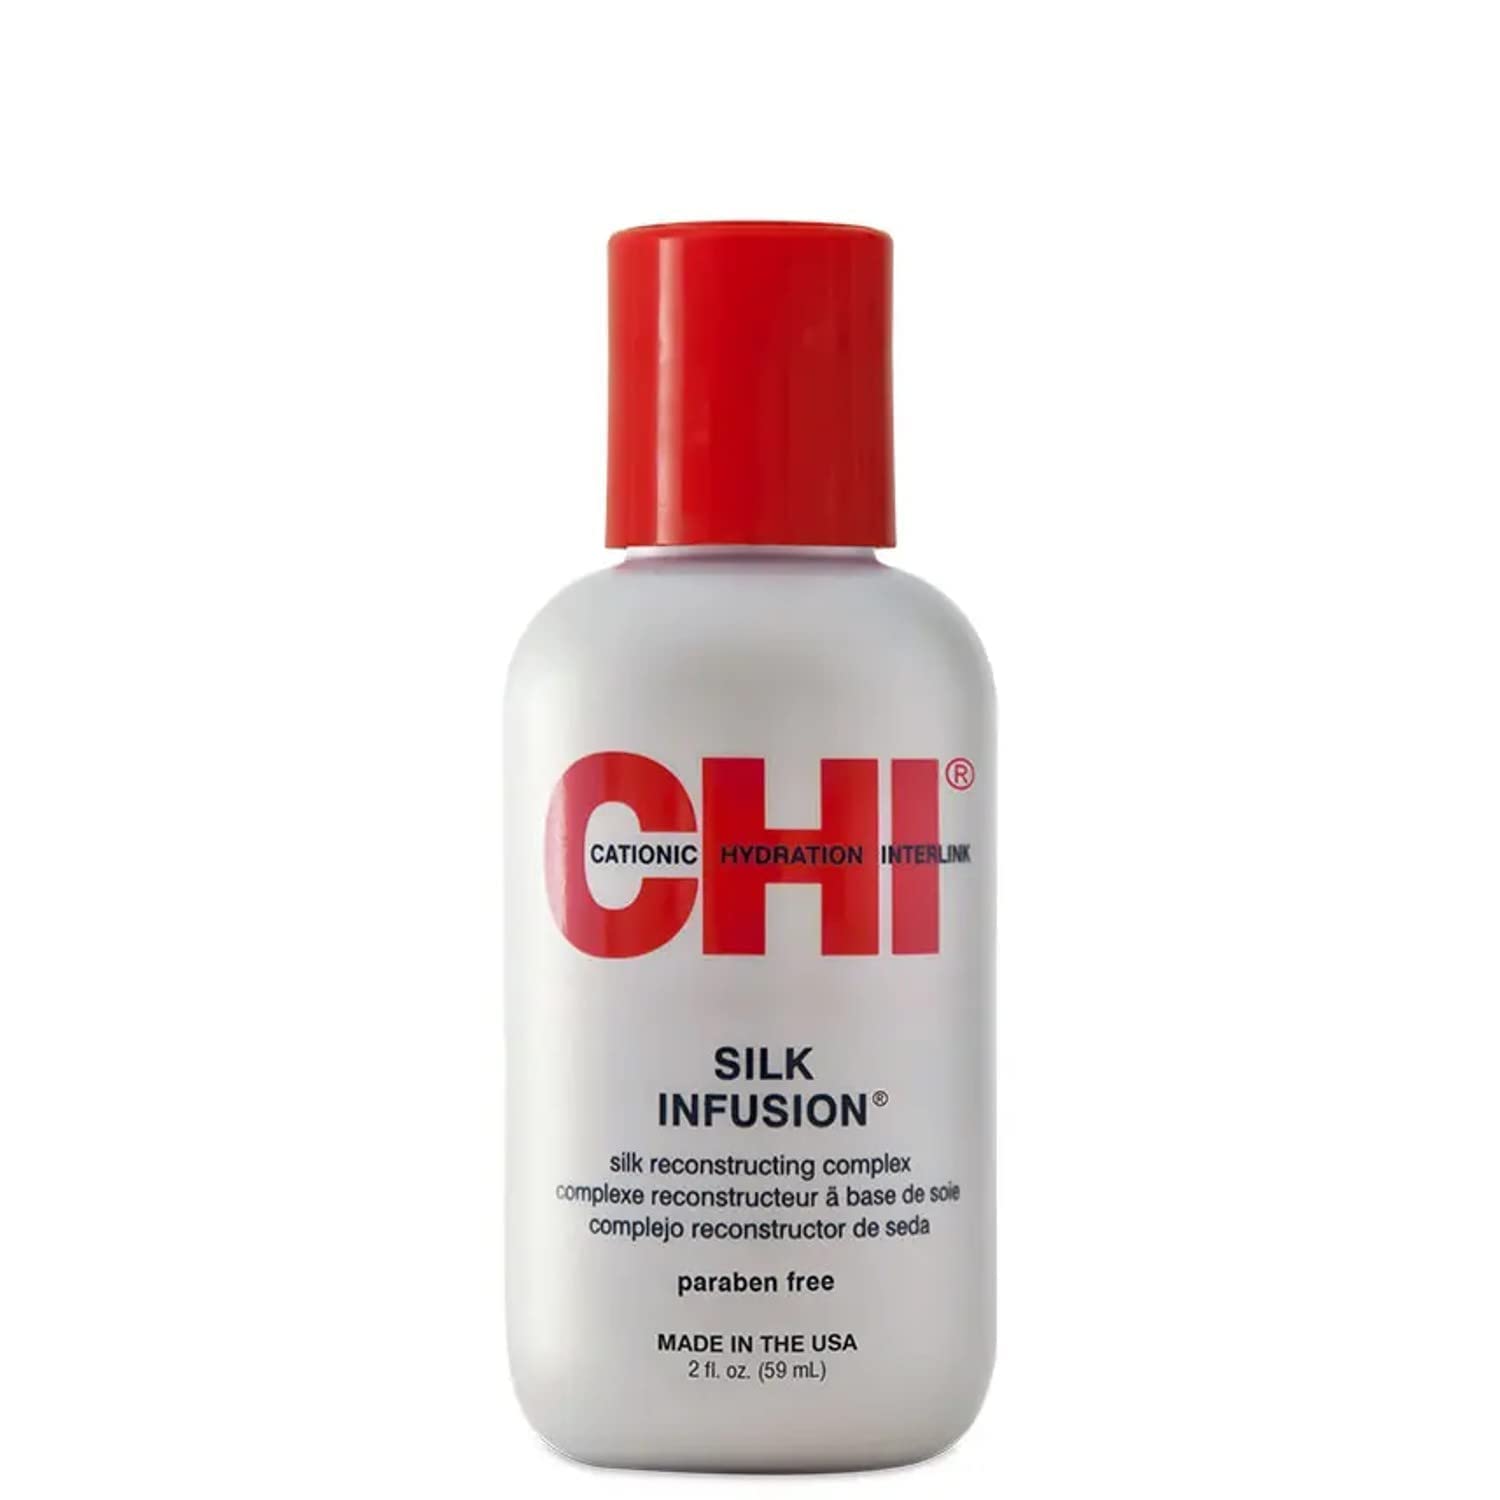 Cationic Hydration Keratin Silk Infusion El complejo re...